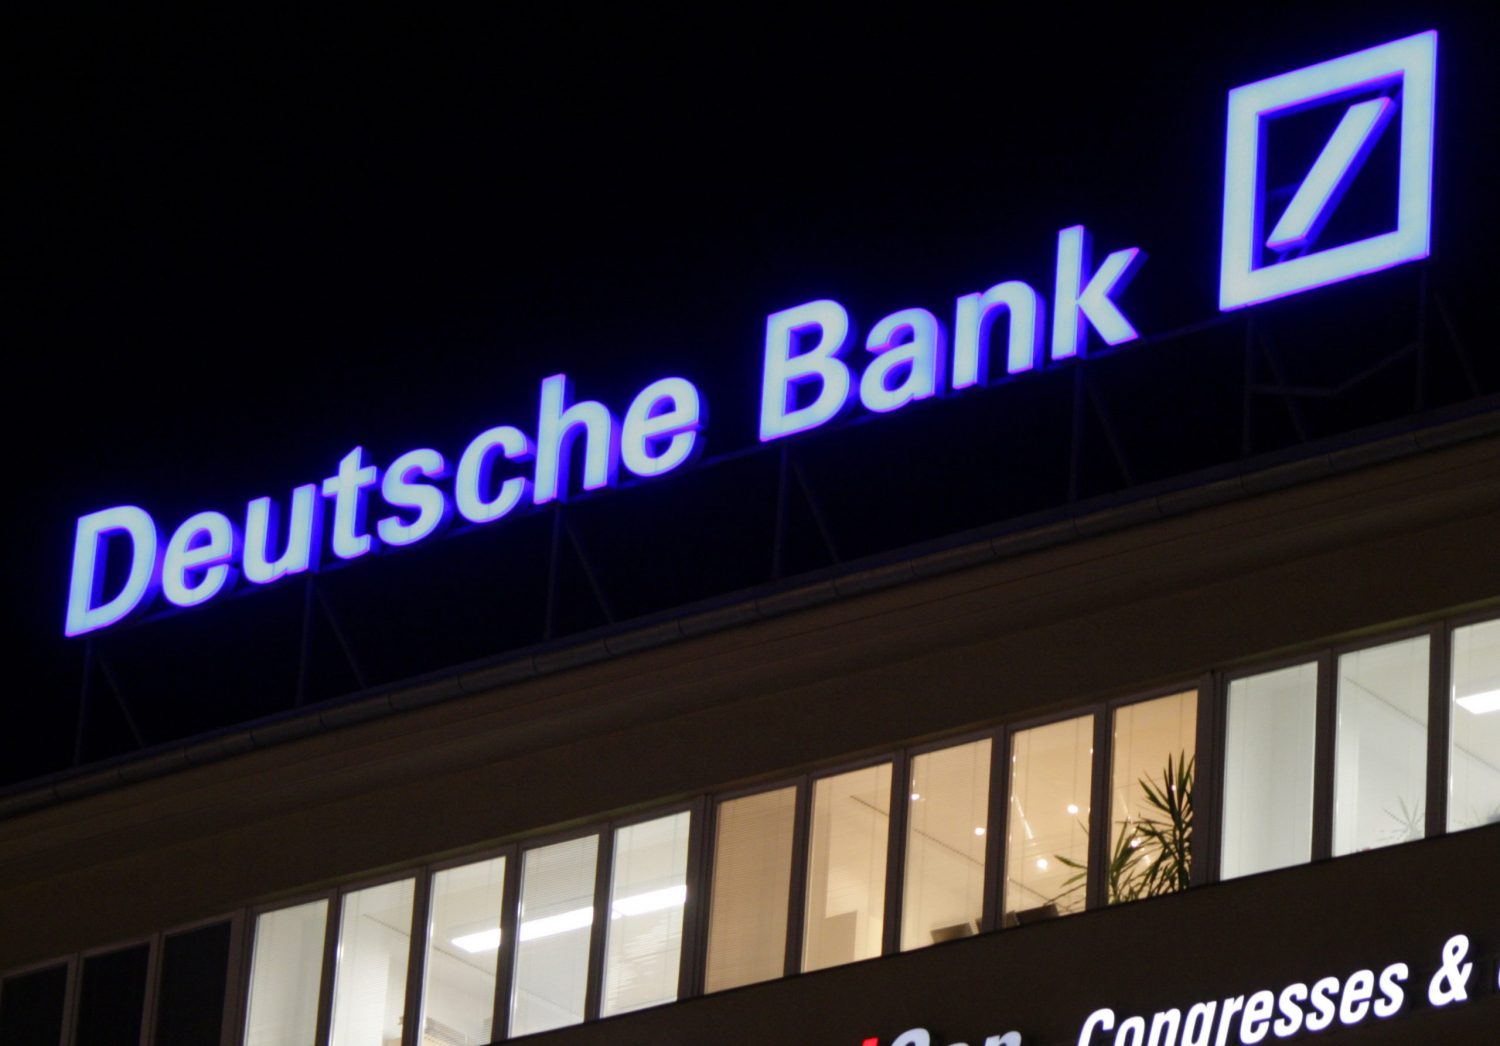 Deutsche-bank-says-digital-currencies-could-be-mainstream-in-2-years